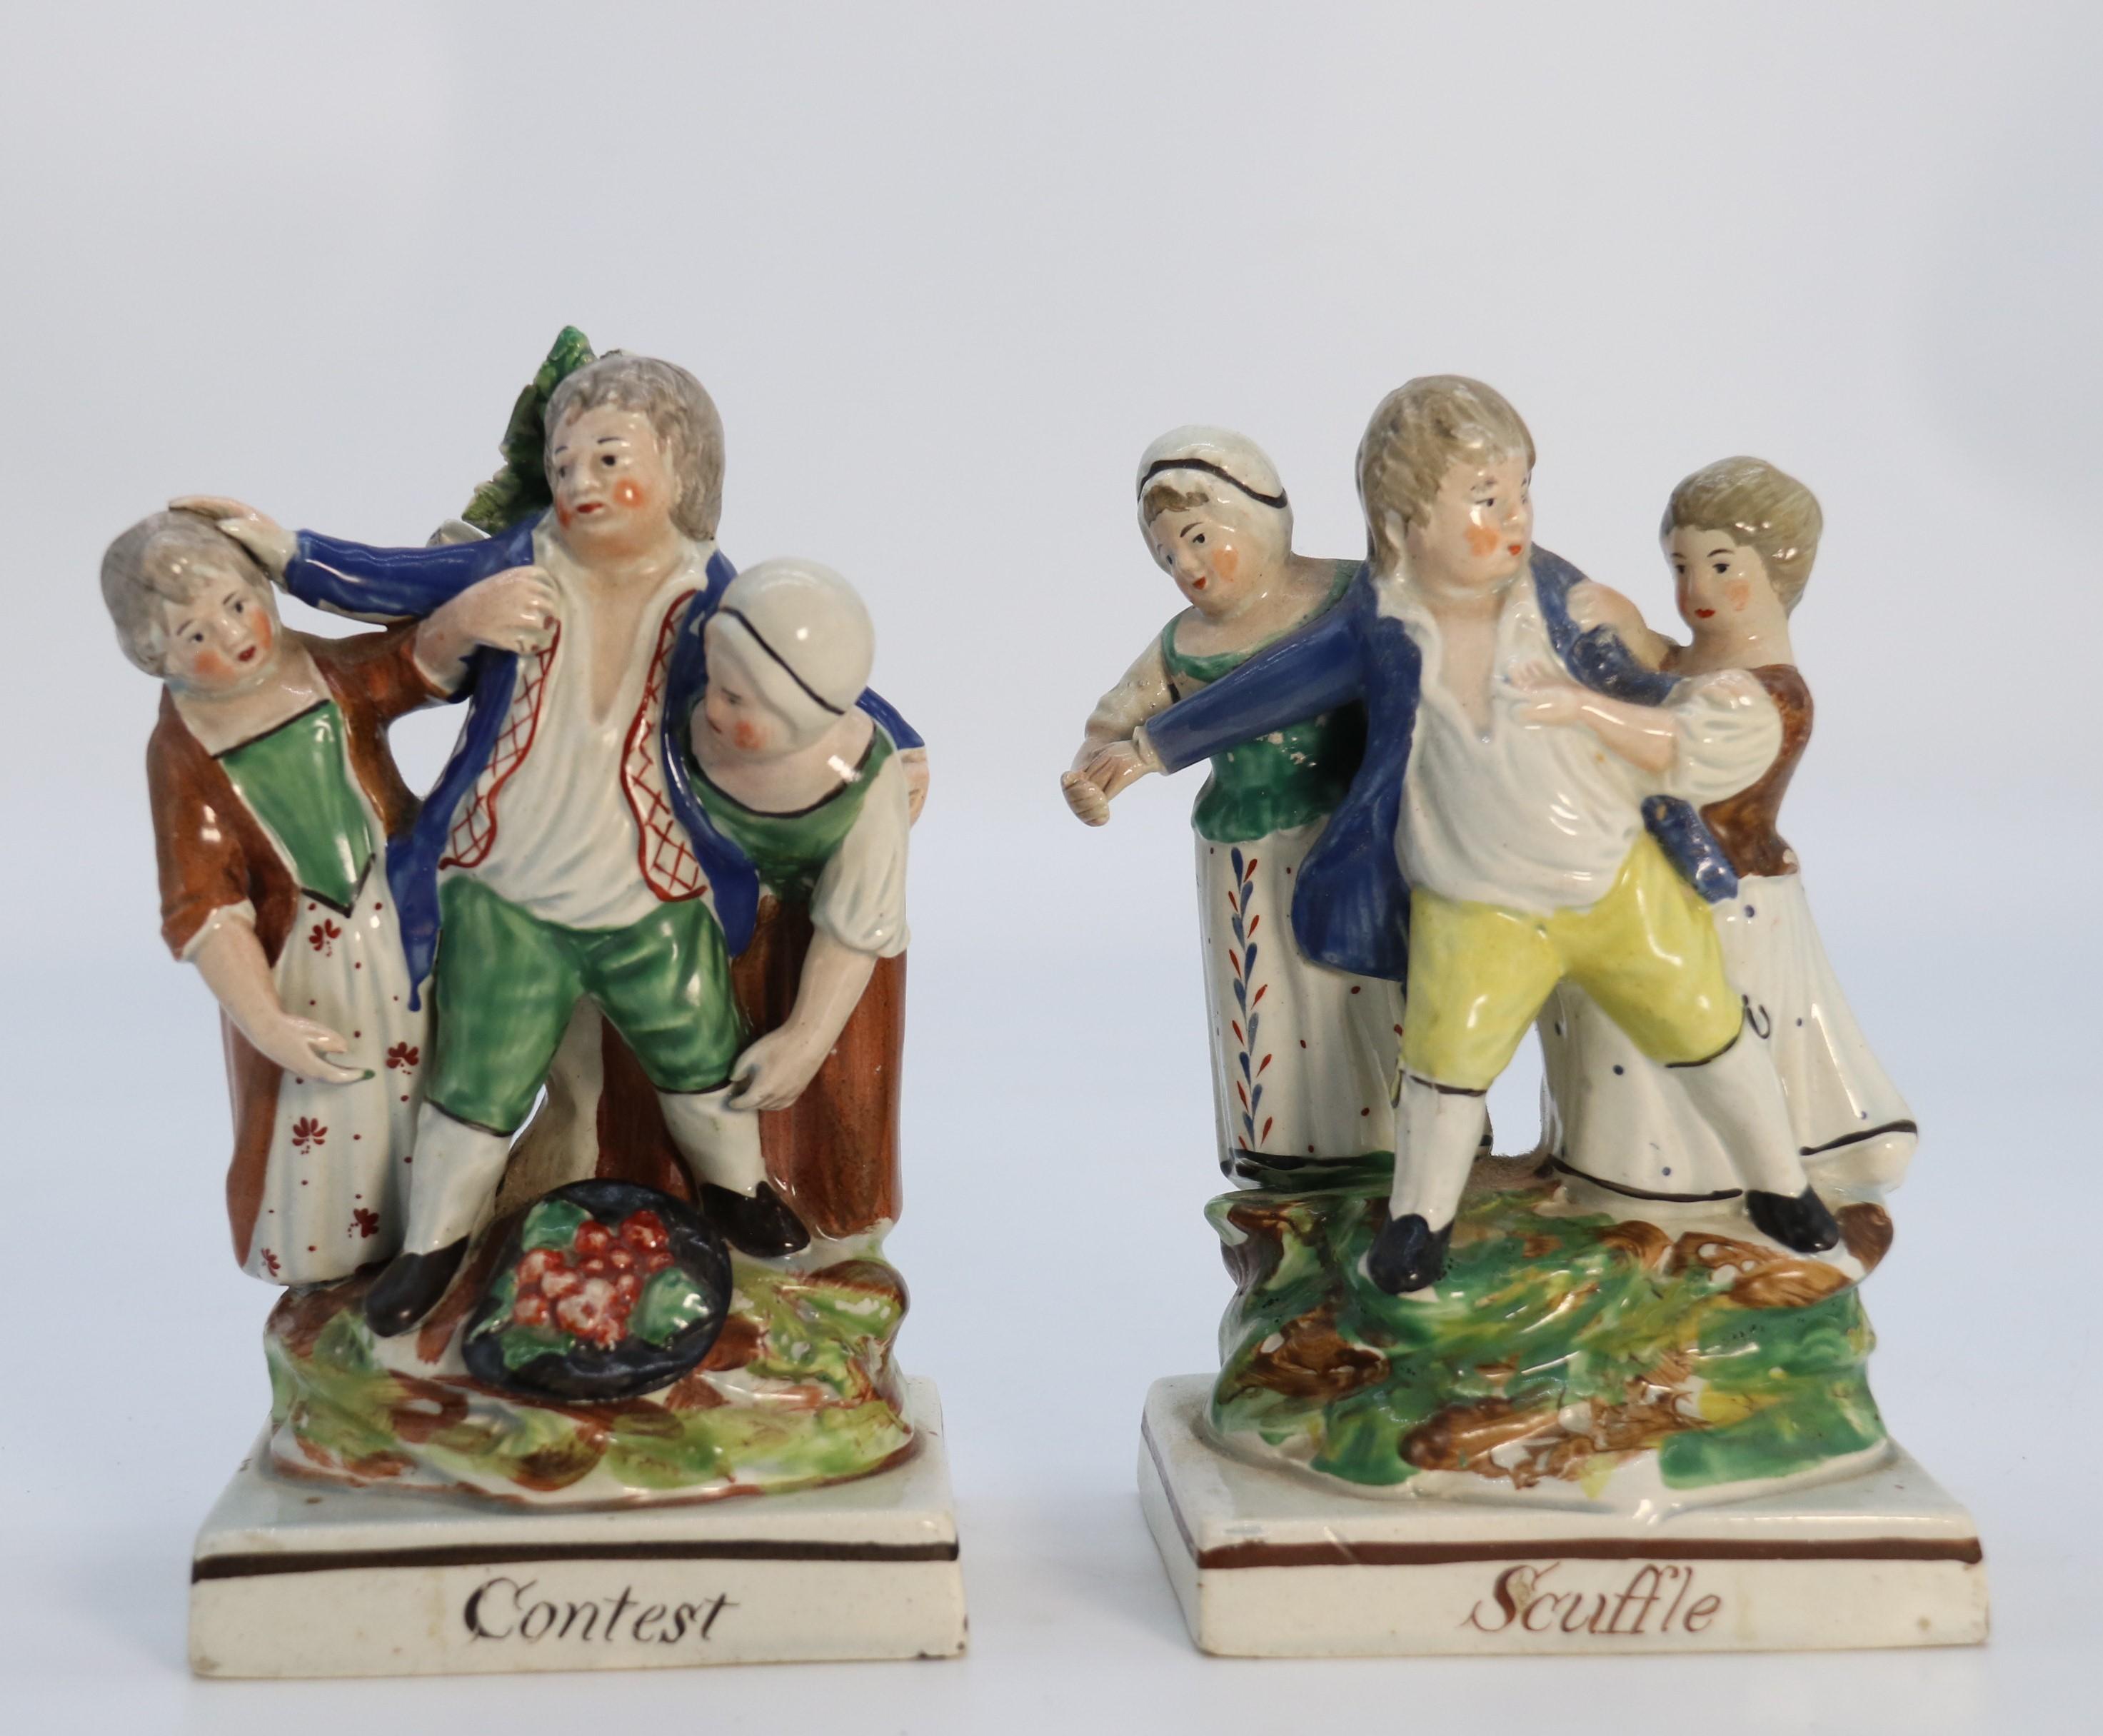 A rare pair of late 18th century English Staffordshire figure groups of two young men about to have a scuffle.

This rare pair of early English Staffordshire groups each portray a young man about to enter a scuffle. Both he and his opponent are